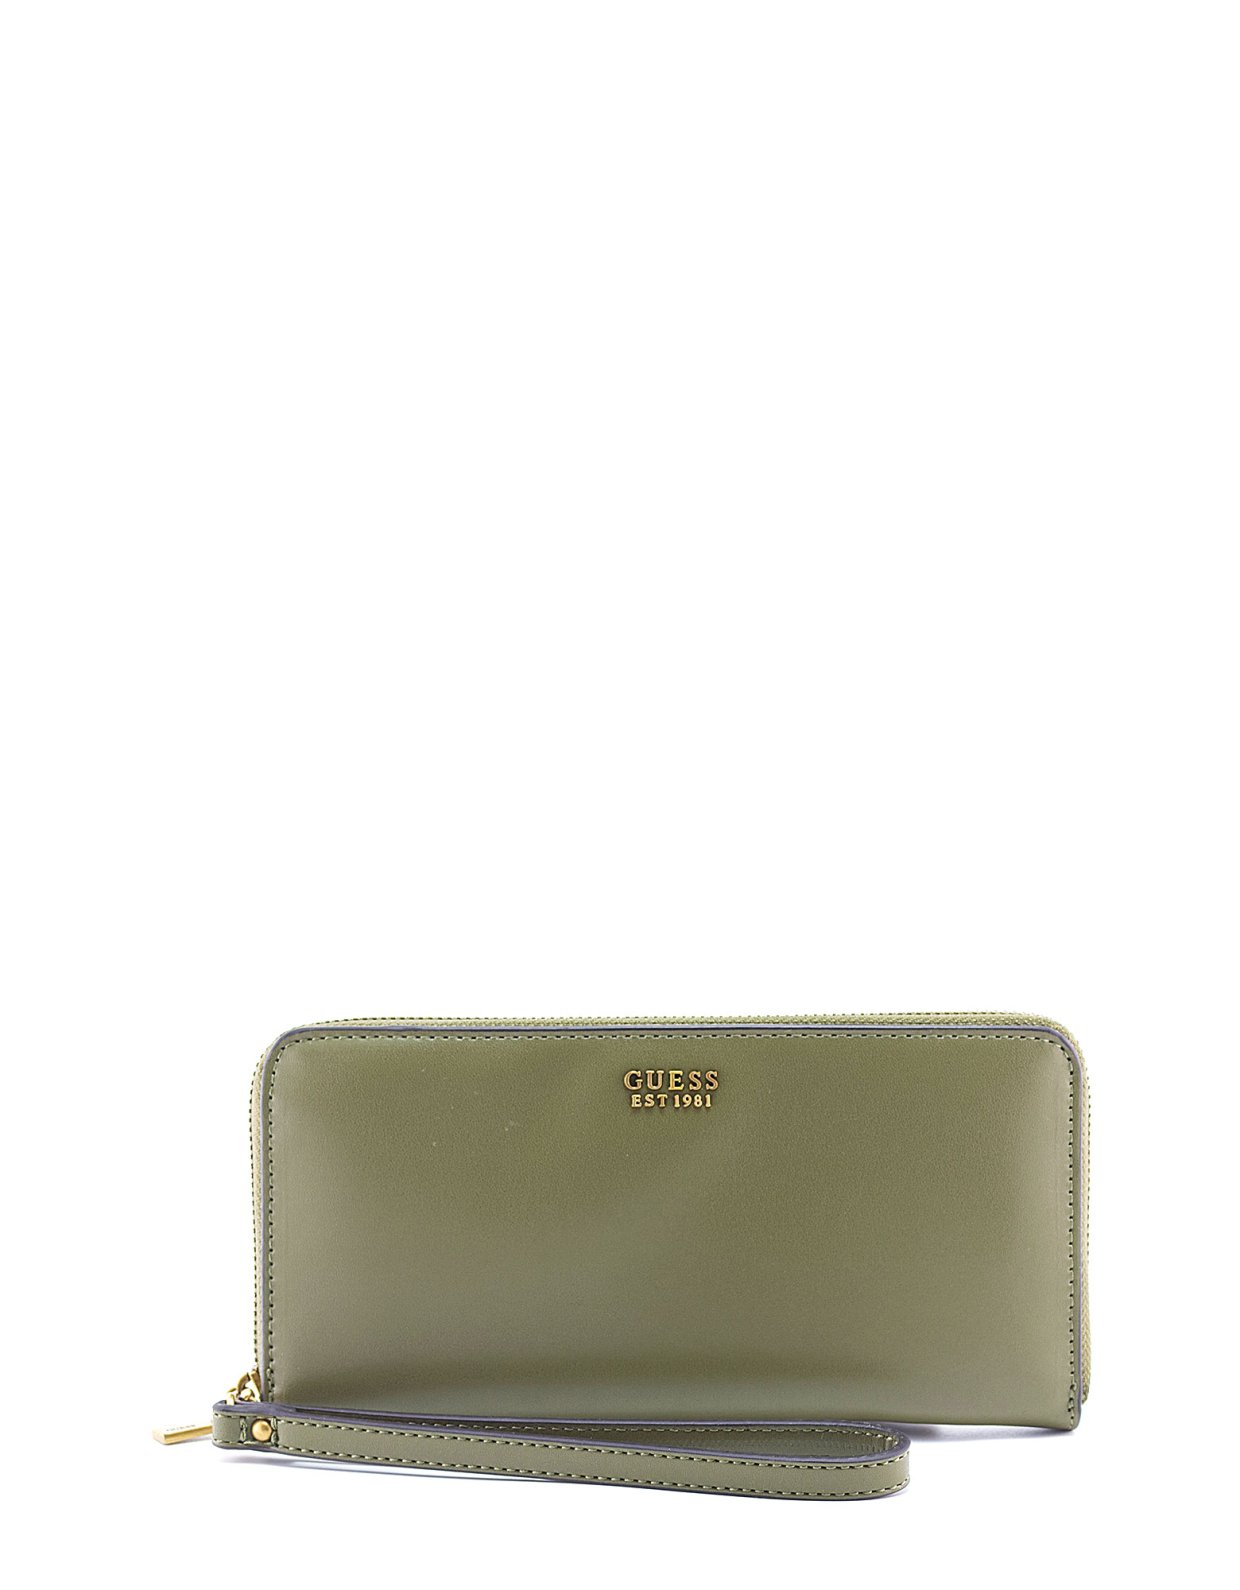 Guess Atene maxi wallet olive